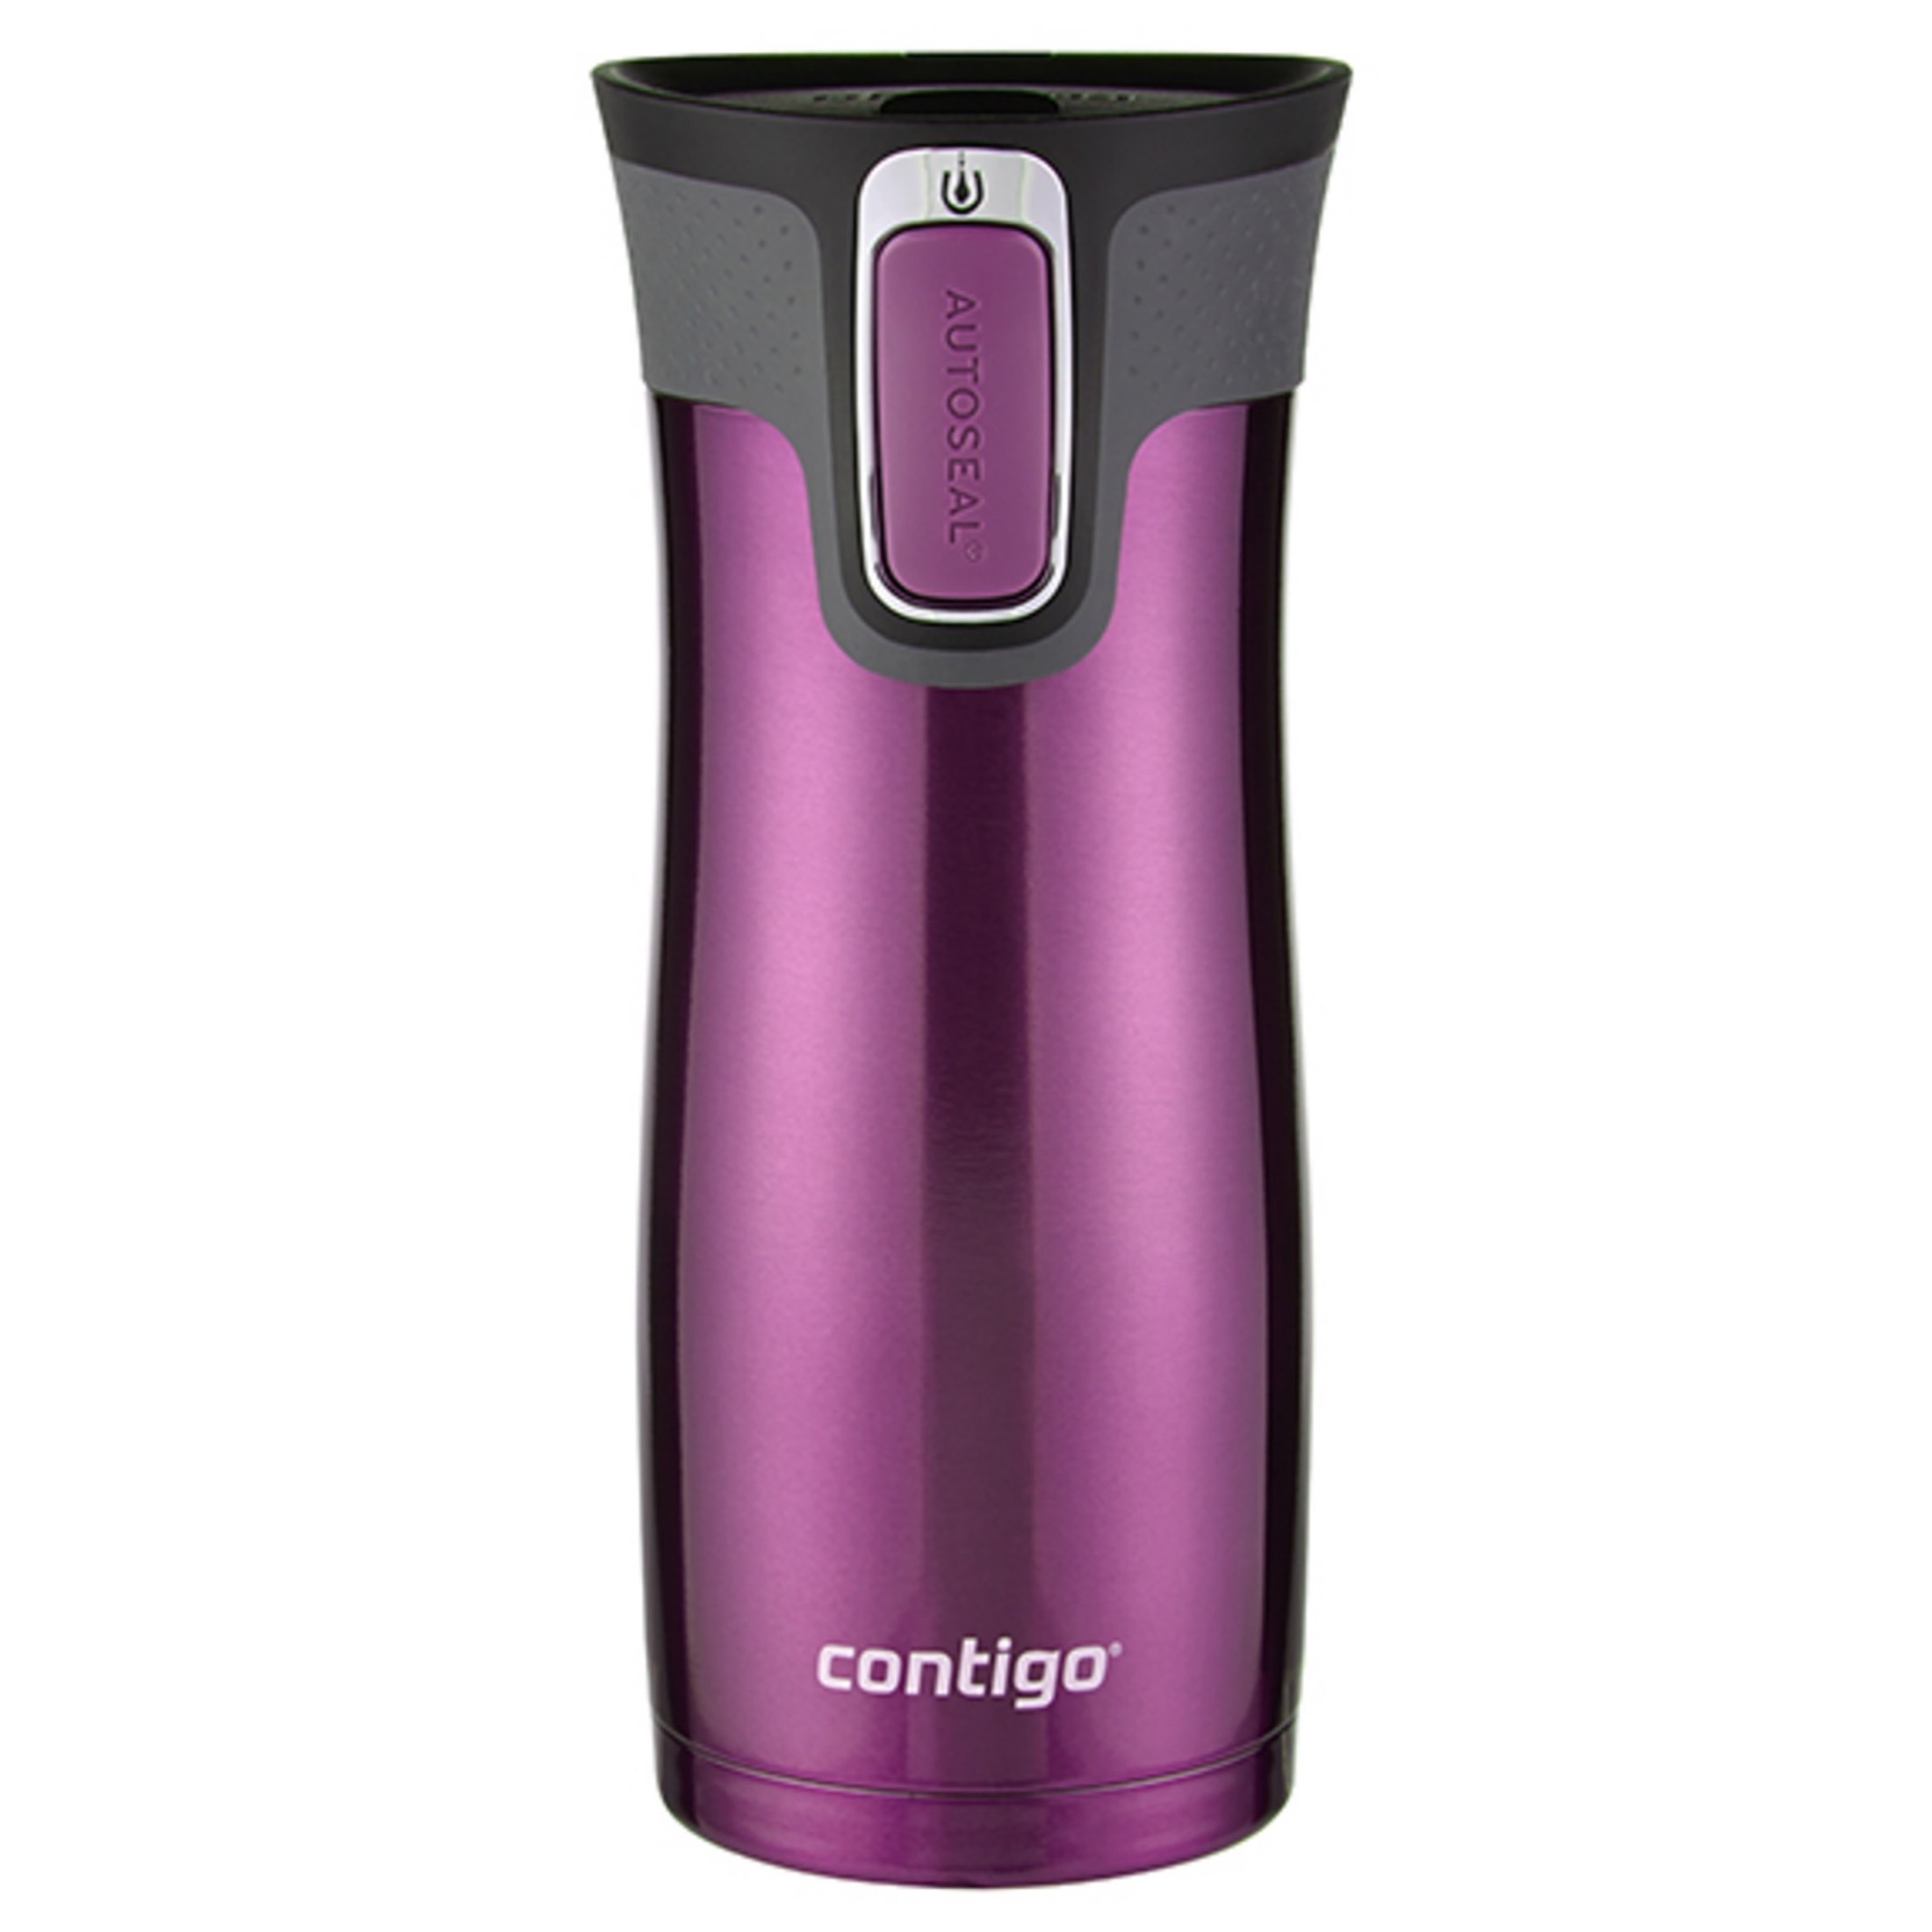 Contigo West Loop Stainless Steel Travel Mug with AUTOSEAL Lid Radiant Orchid, 16 fl oz. - image 1 of 4